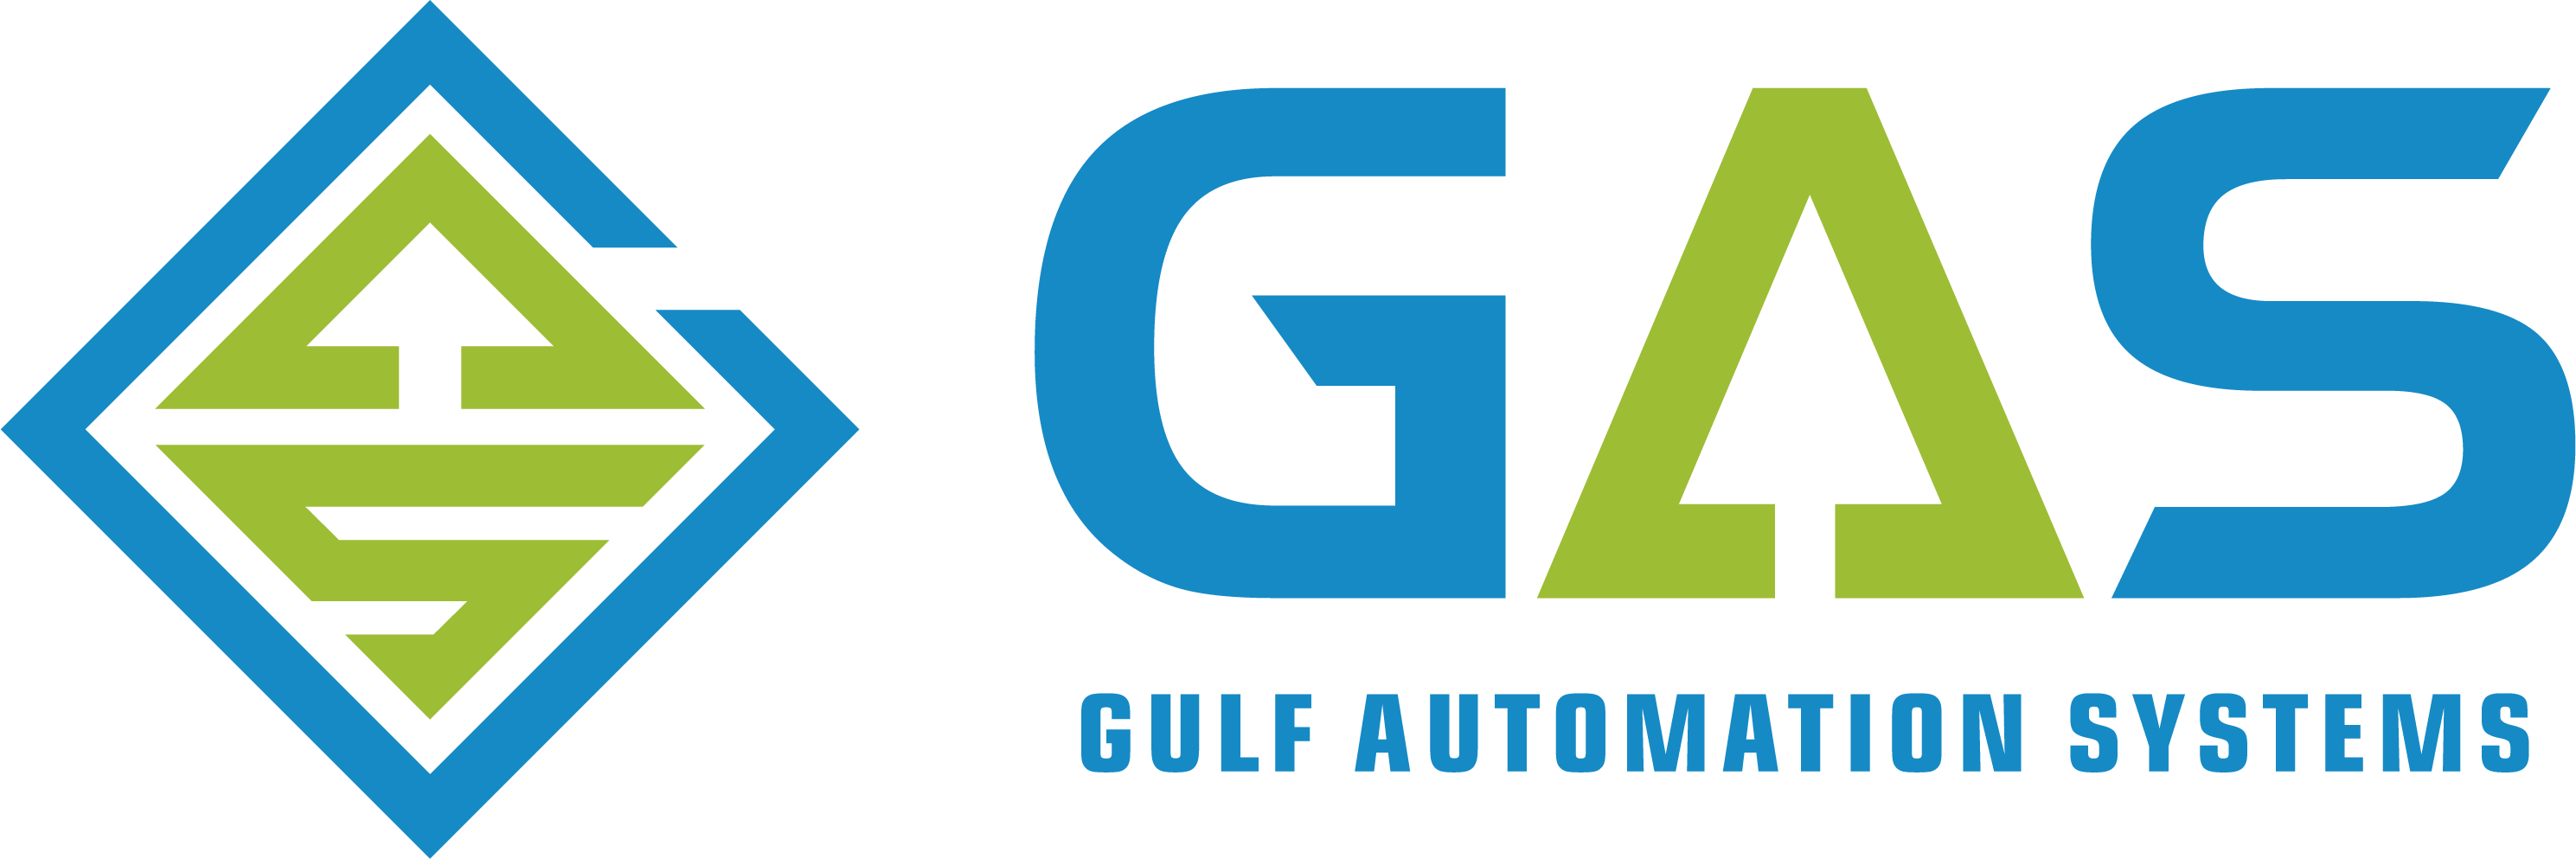 Gulf Automation Systems